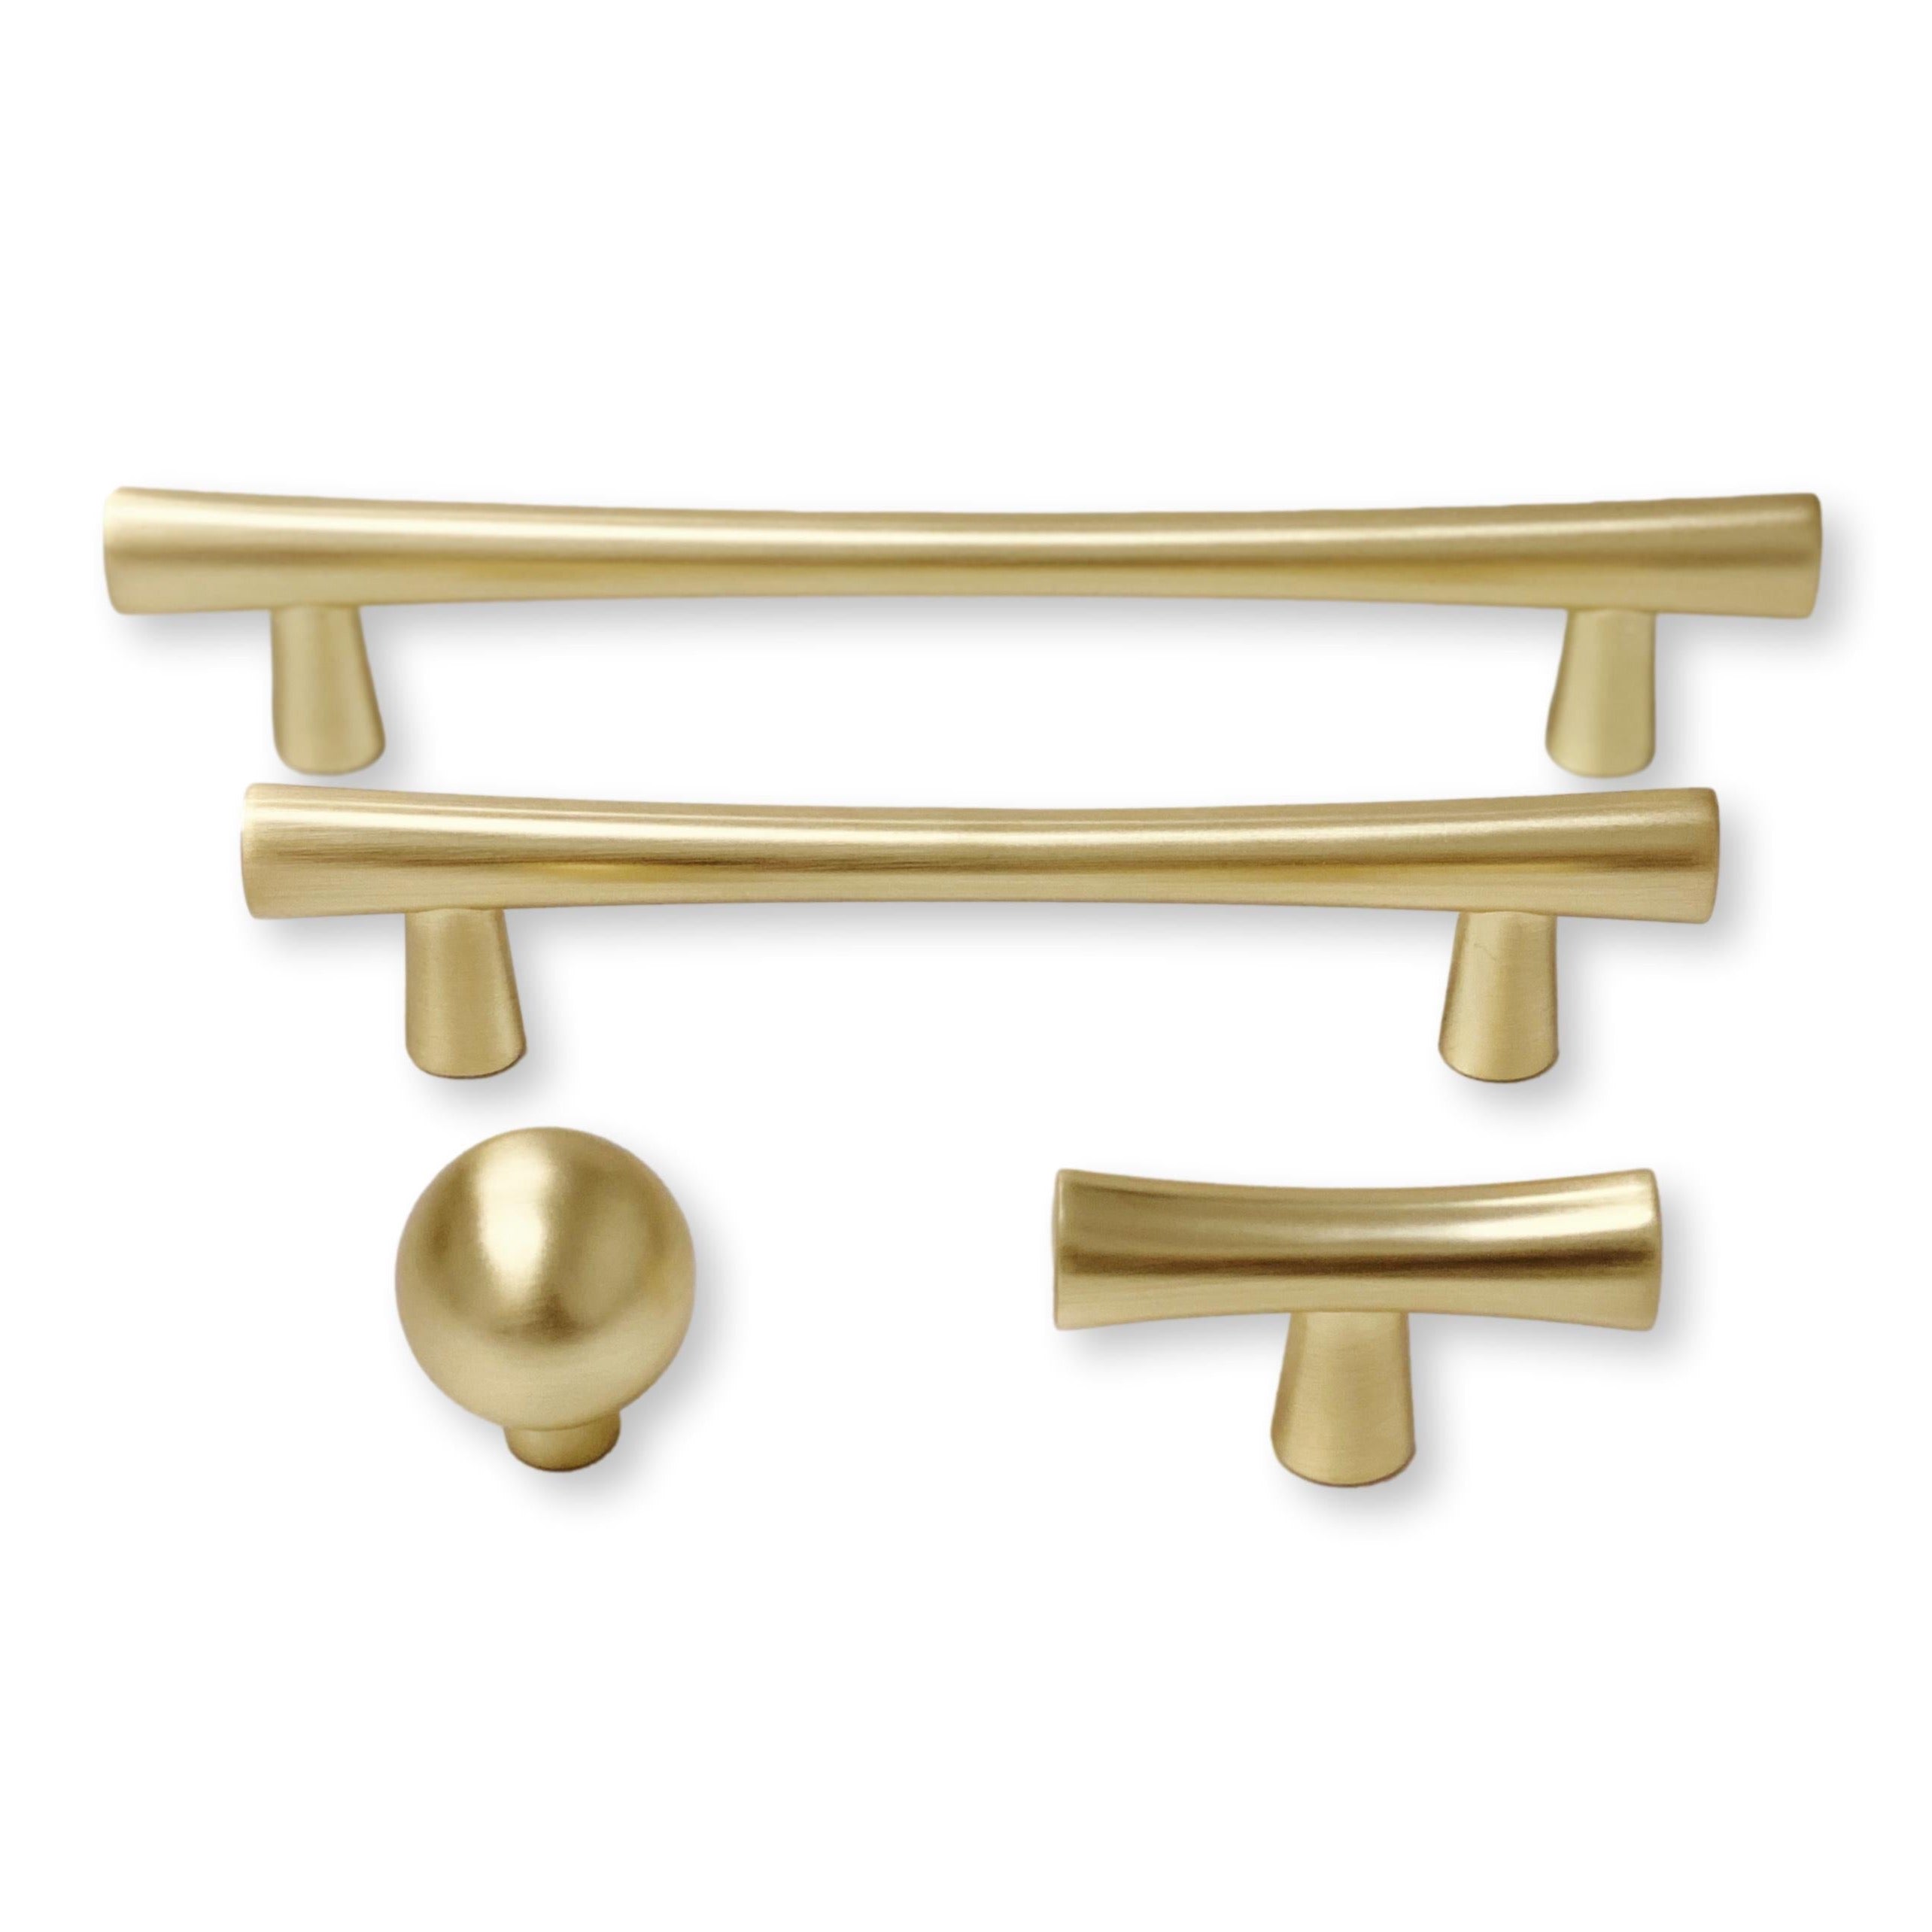 Solid Satin Brass Cabinet Handles and Knobs Available in Various Lengths  and Sizes